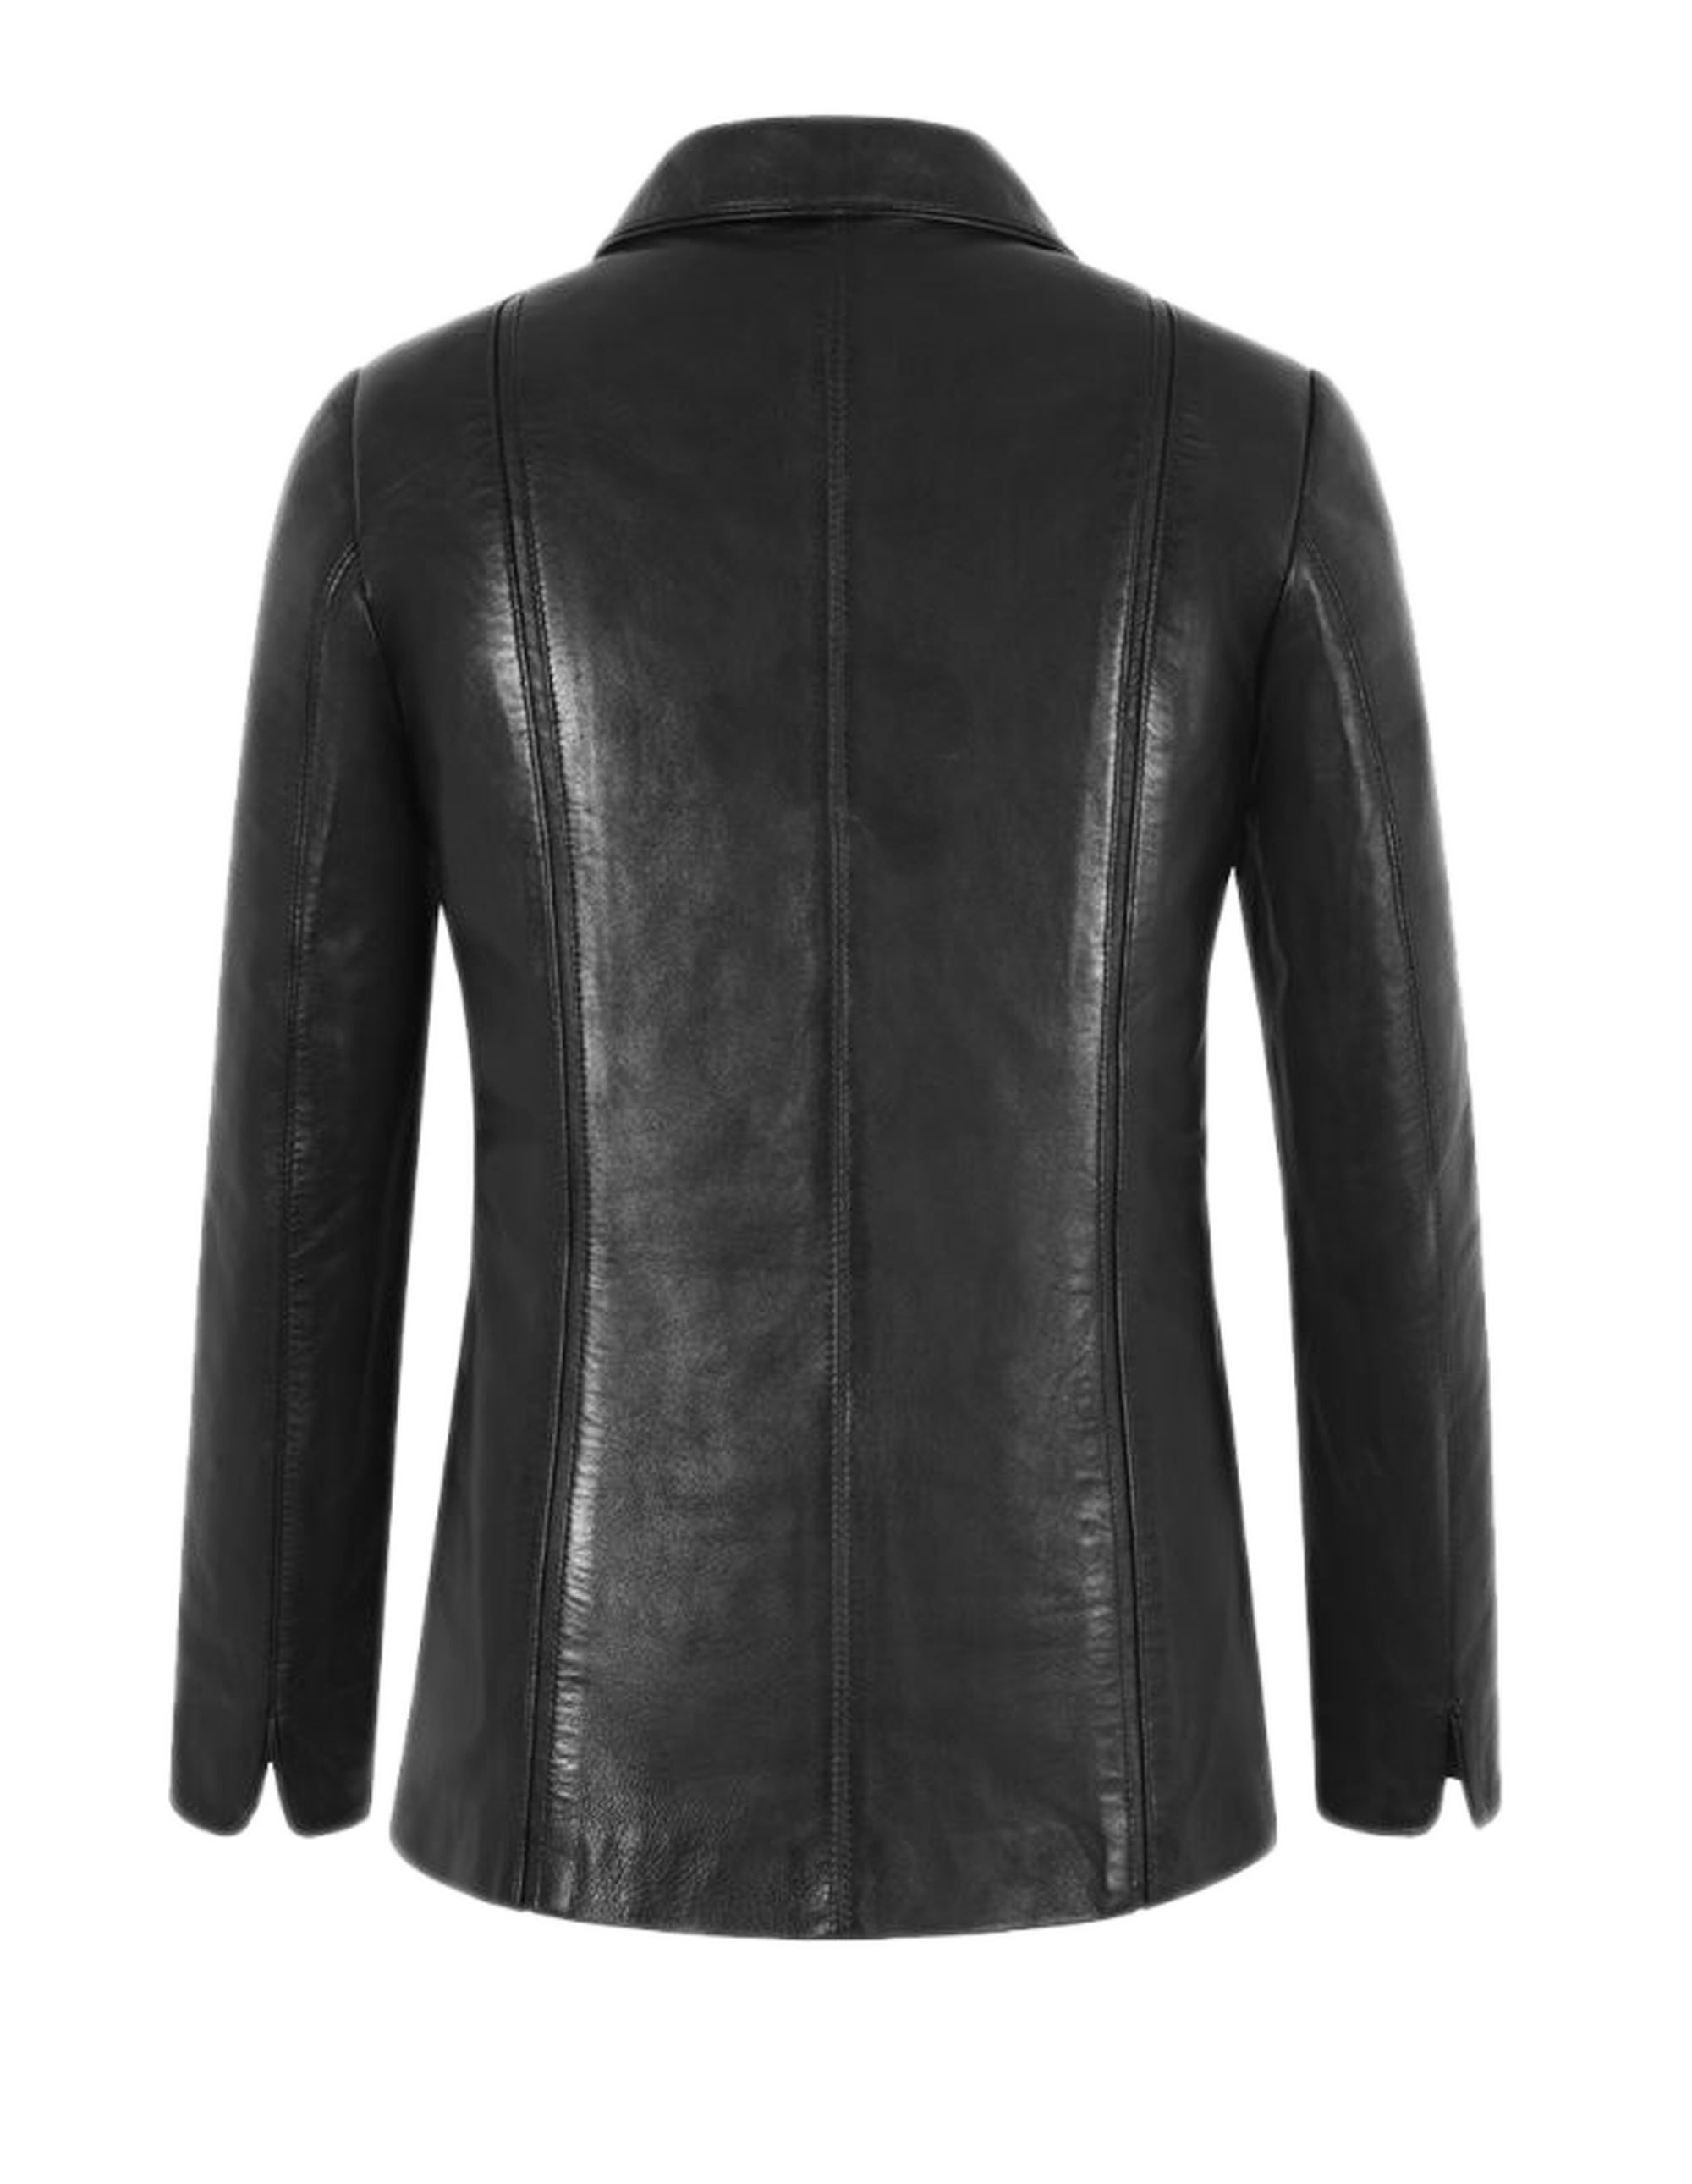 Four Button Three Quarter Leather Coat For Women